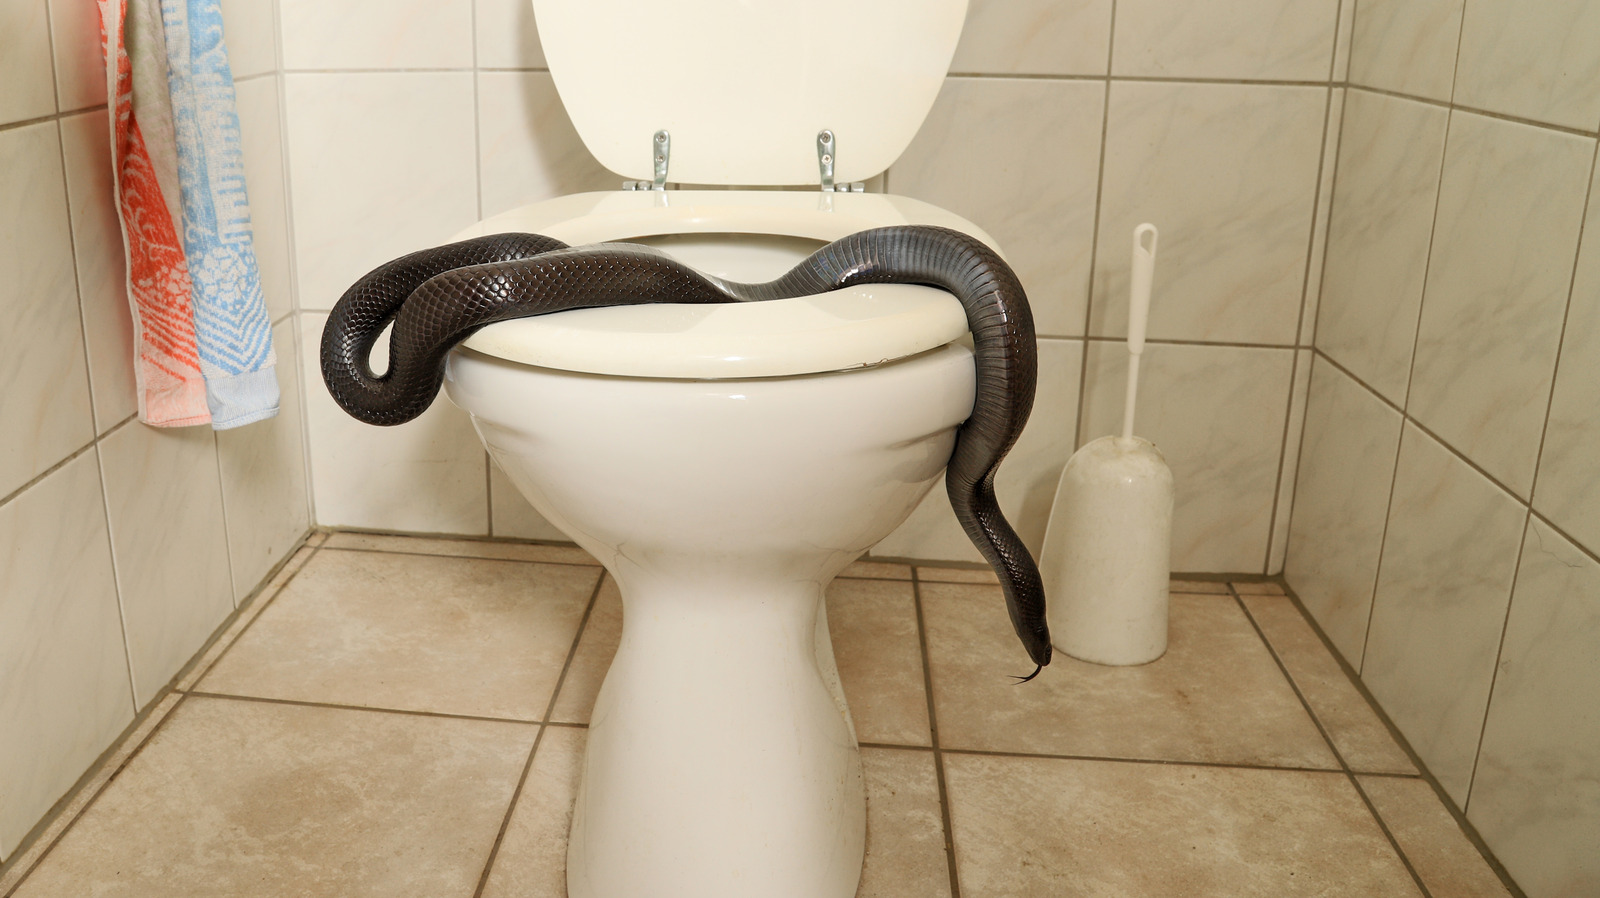 https://www.housedigest.com/img/gallery/prevent-snakes-from-slithering-into-your-toilet-with-one-simple-trick/l-intro-1693354221.jpg